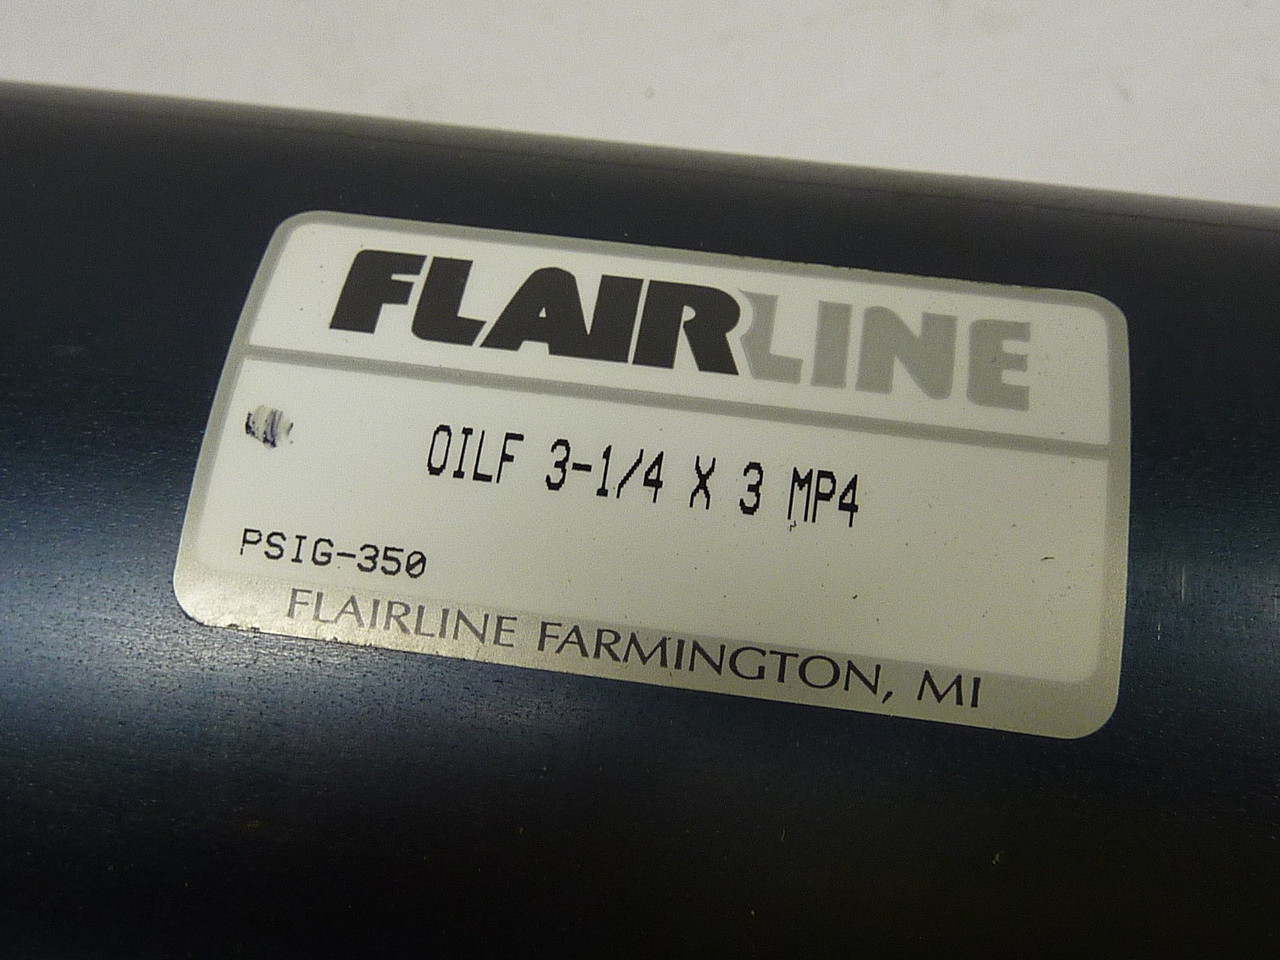 Flairline OILF-3-1/4x3-MP4 Pneumatic Cylinder 350psi USED